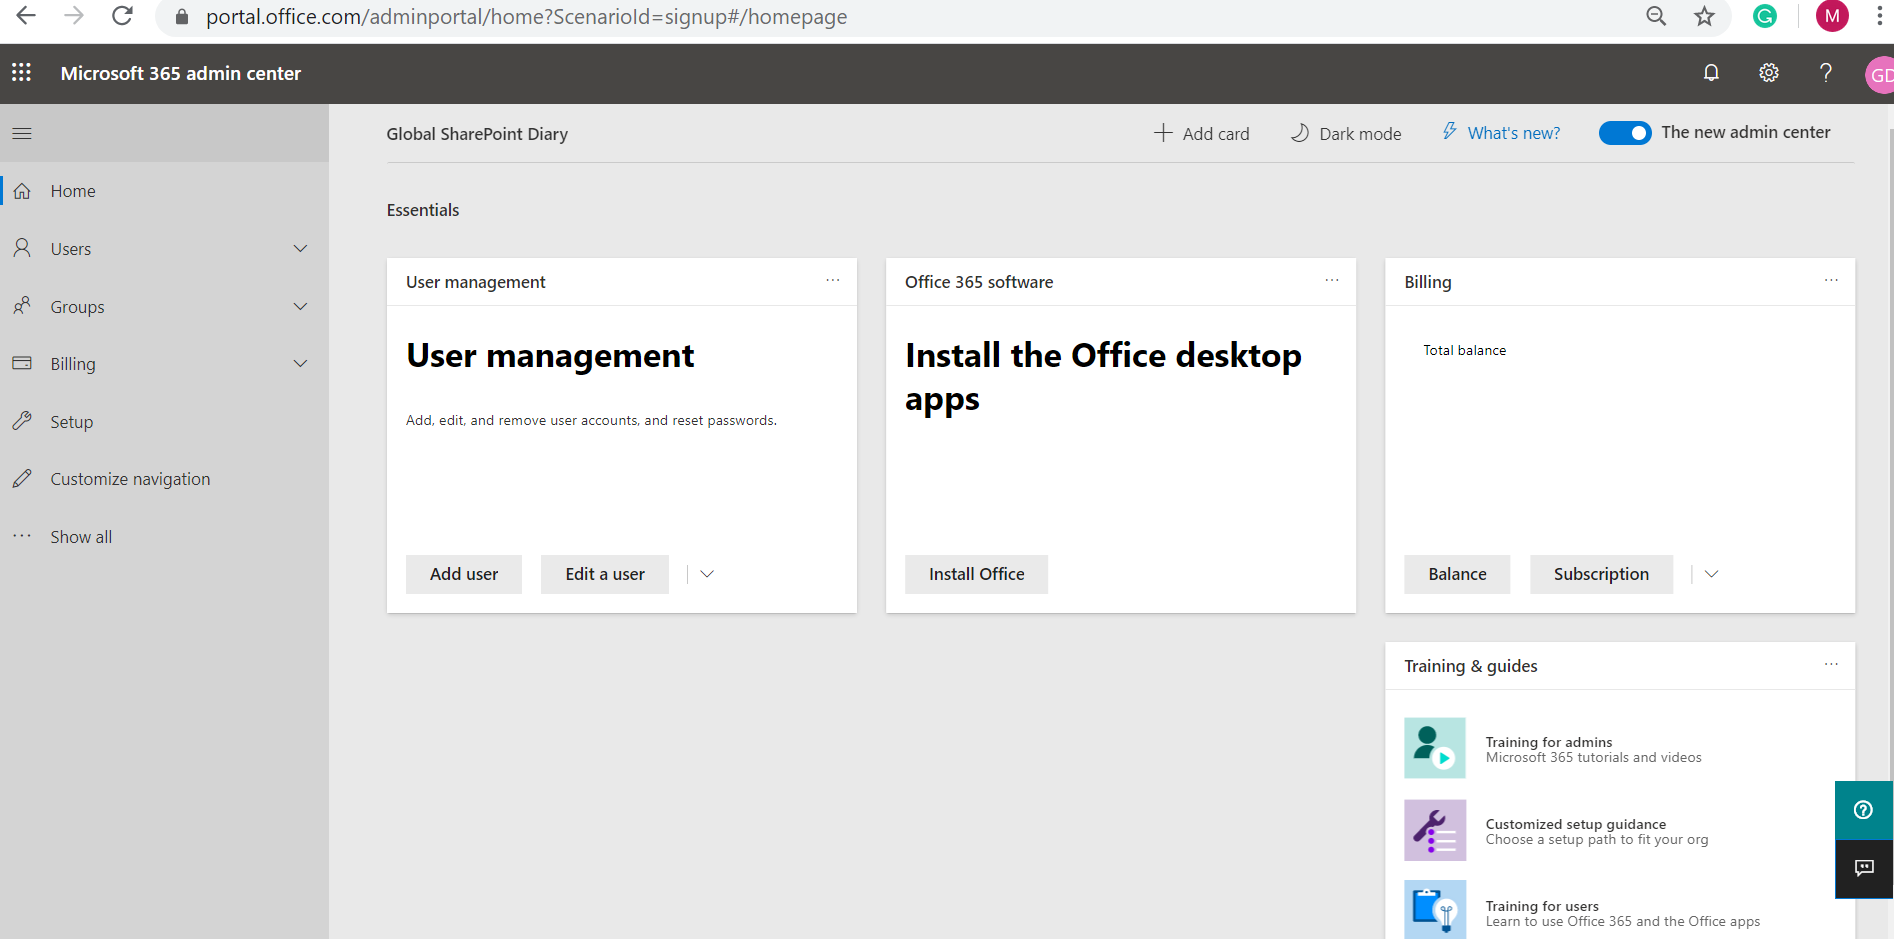 Office 365 E3 Trial - Microsoft 365 admin center home page - after configuration